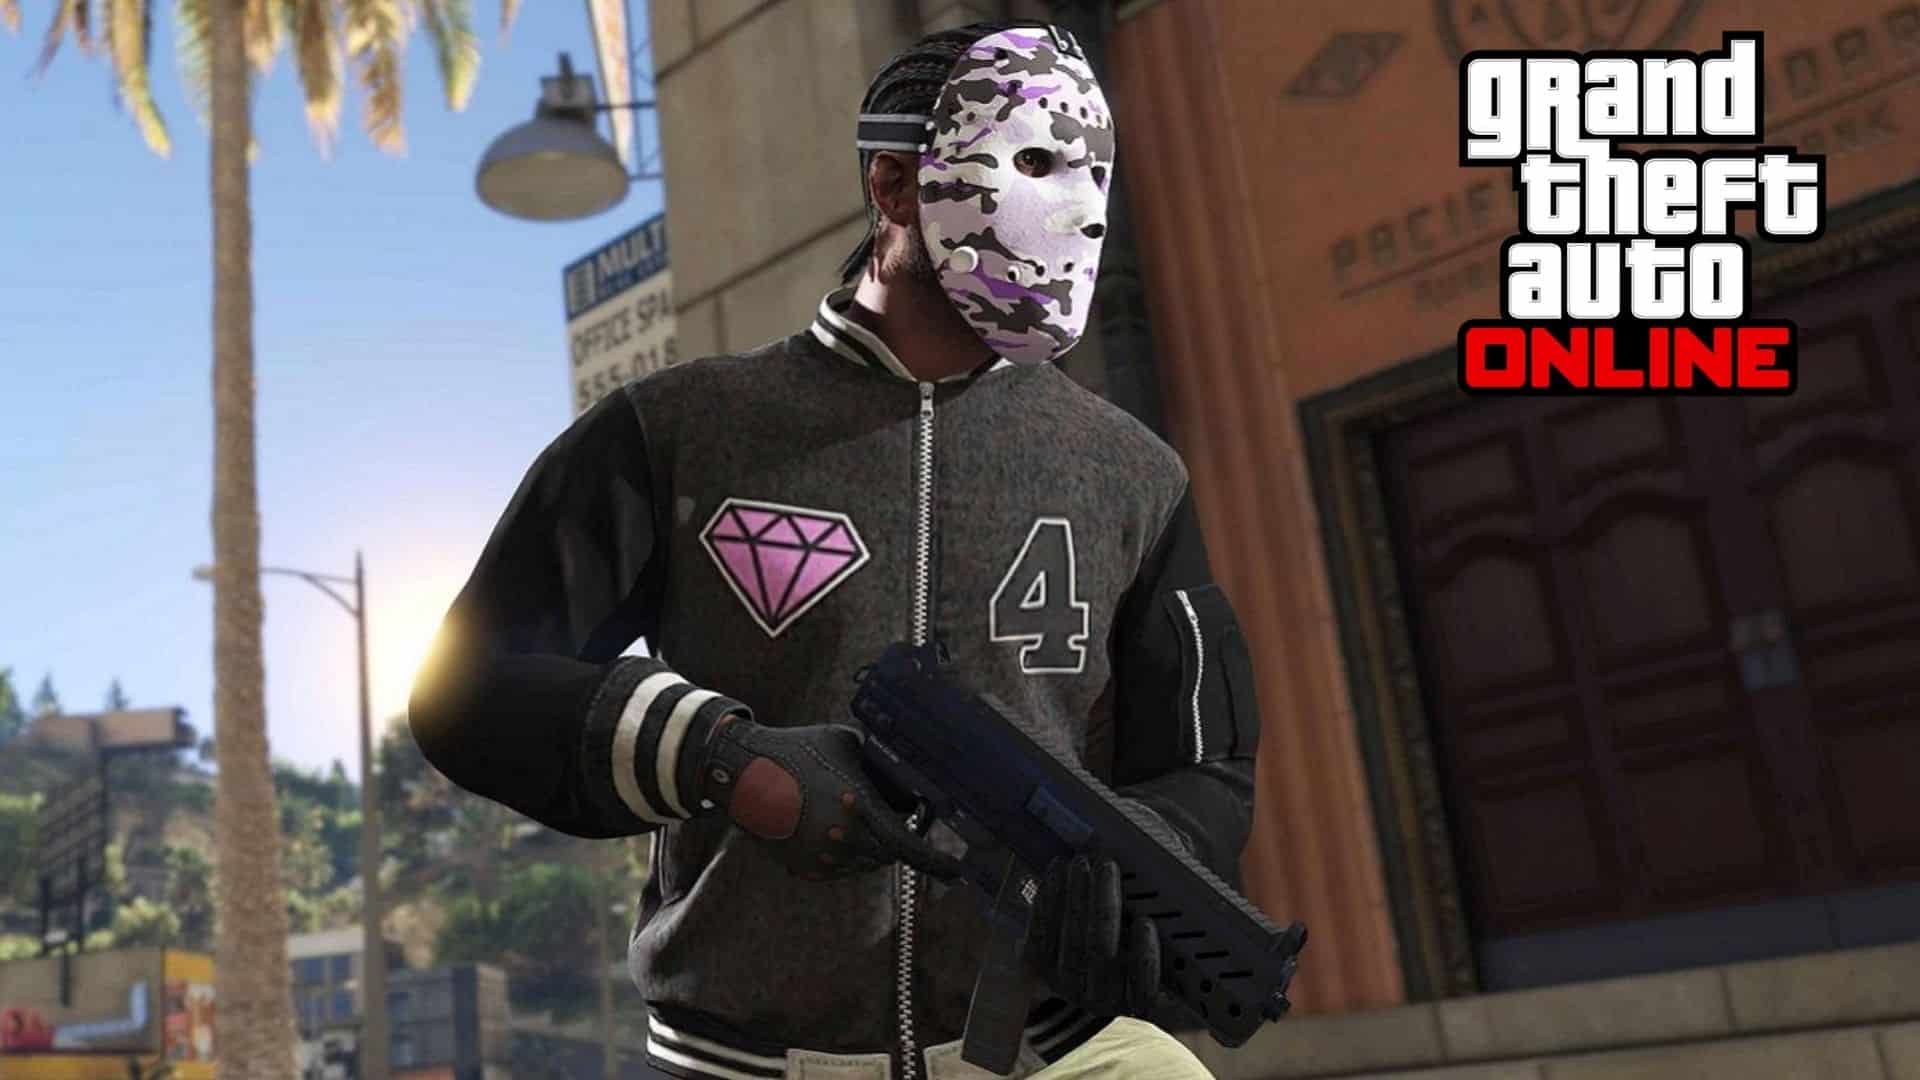 Gta online character holding a gun outside of a bank